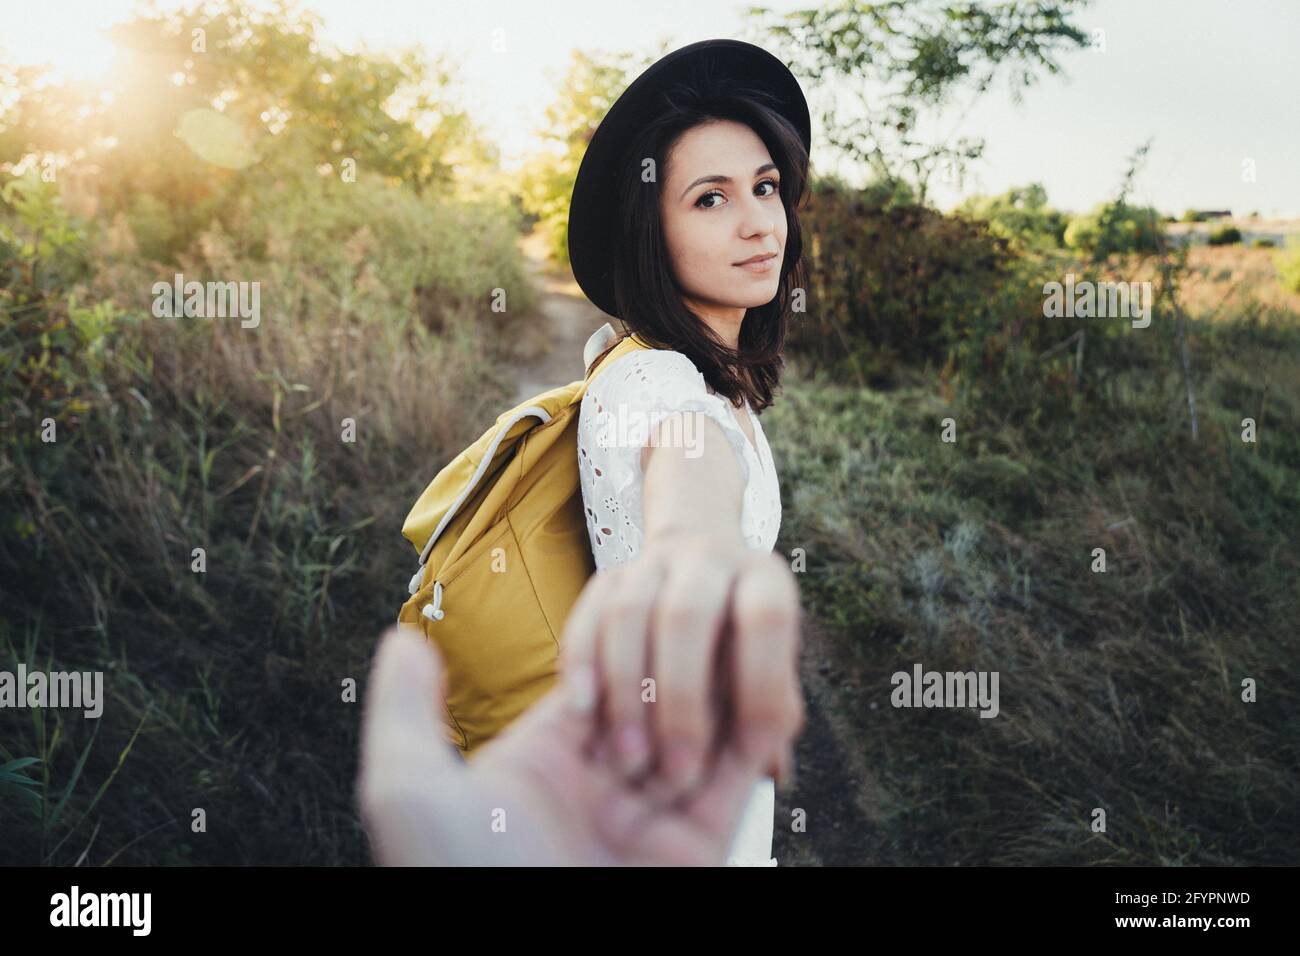 Hiker woman holding man's hand and leading him on nature outdoor. Couple in love. Point of view shot Stock Photo